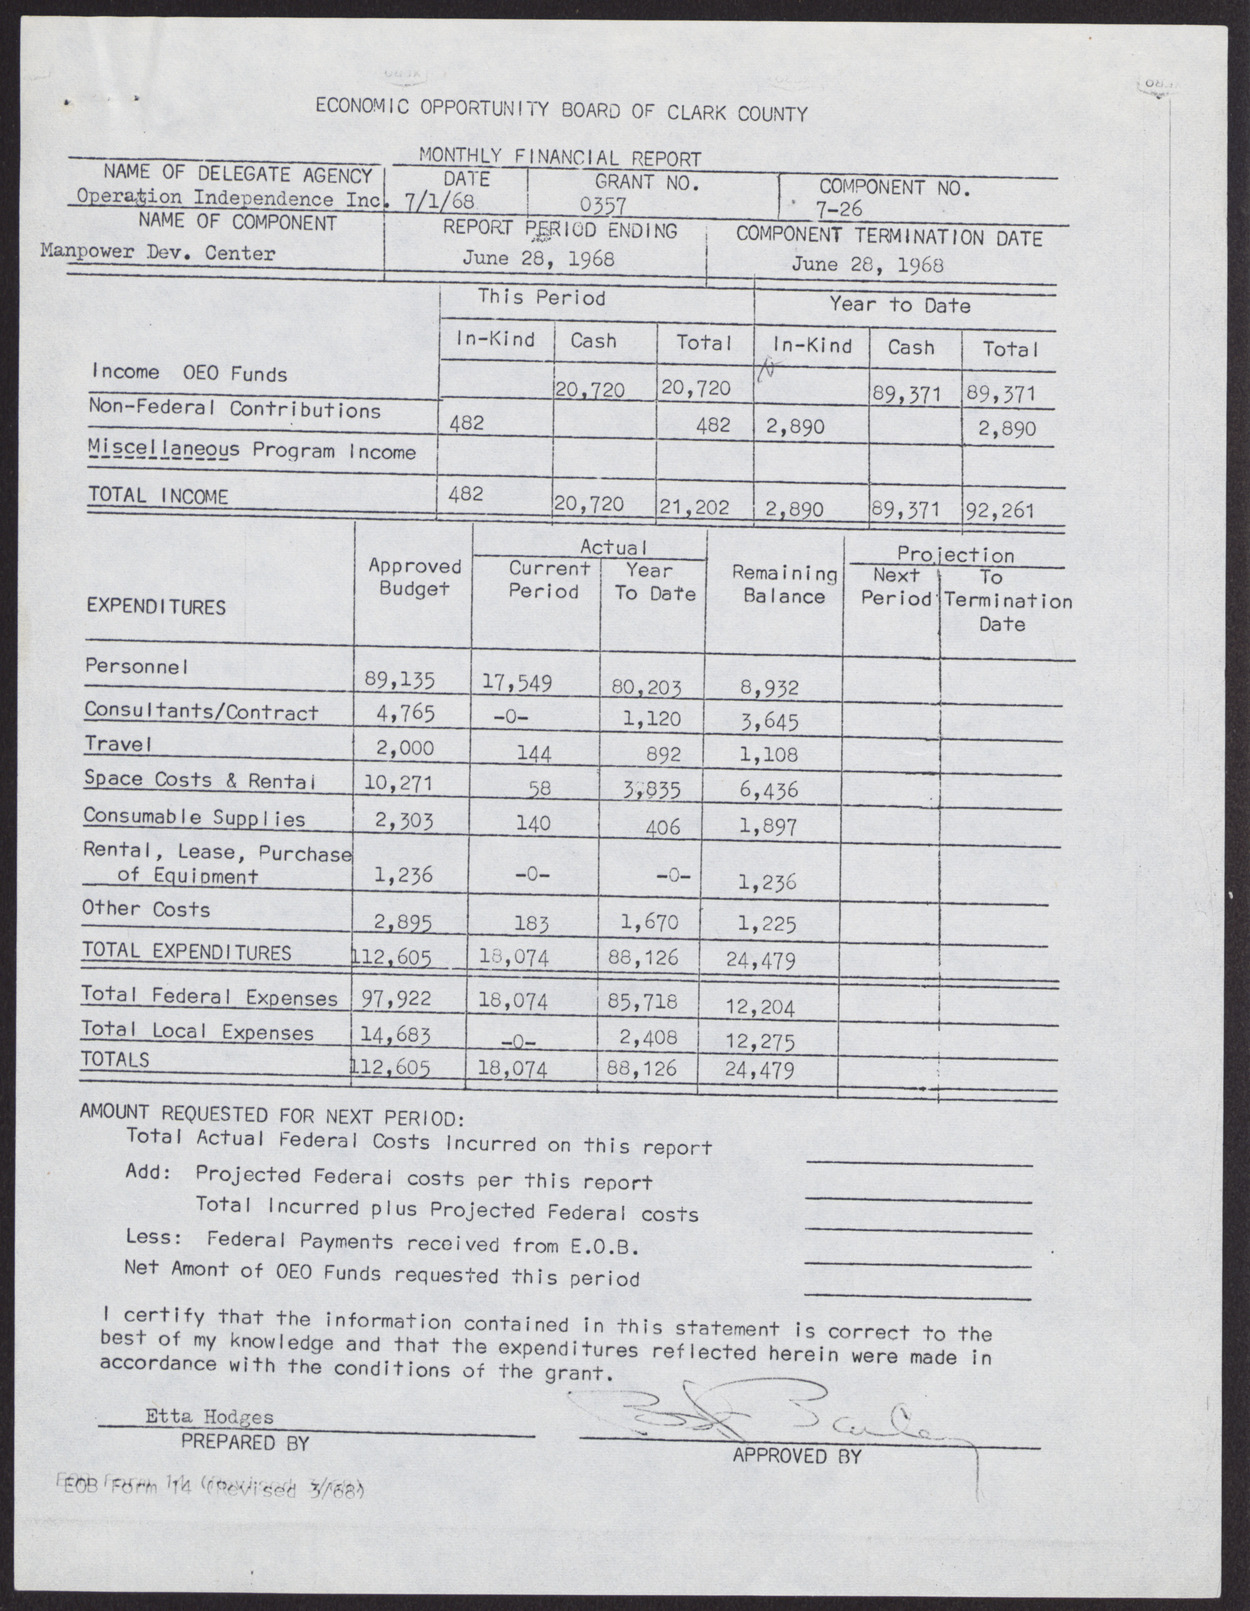 Financial Reports for the Economic Opportunity Board of Clark County (4 pages), 1968, page 2